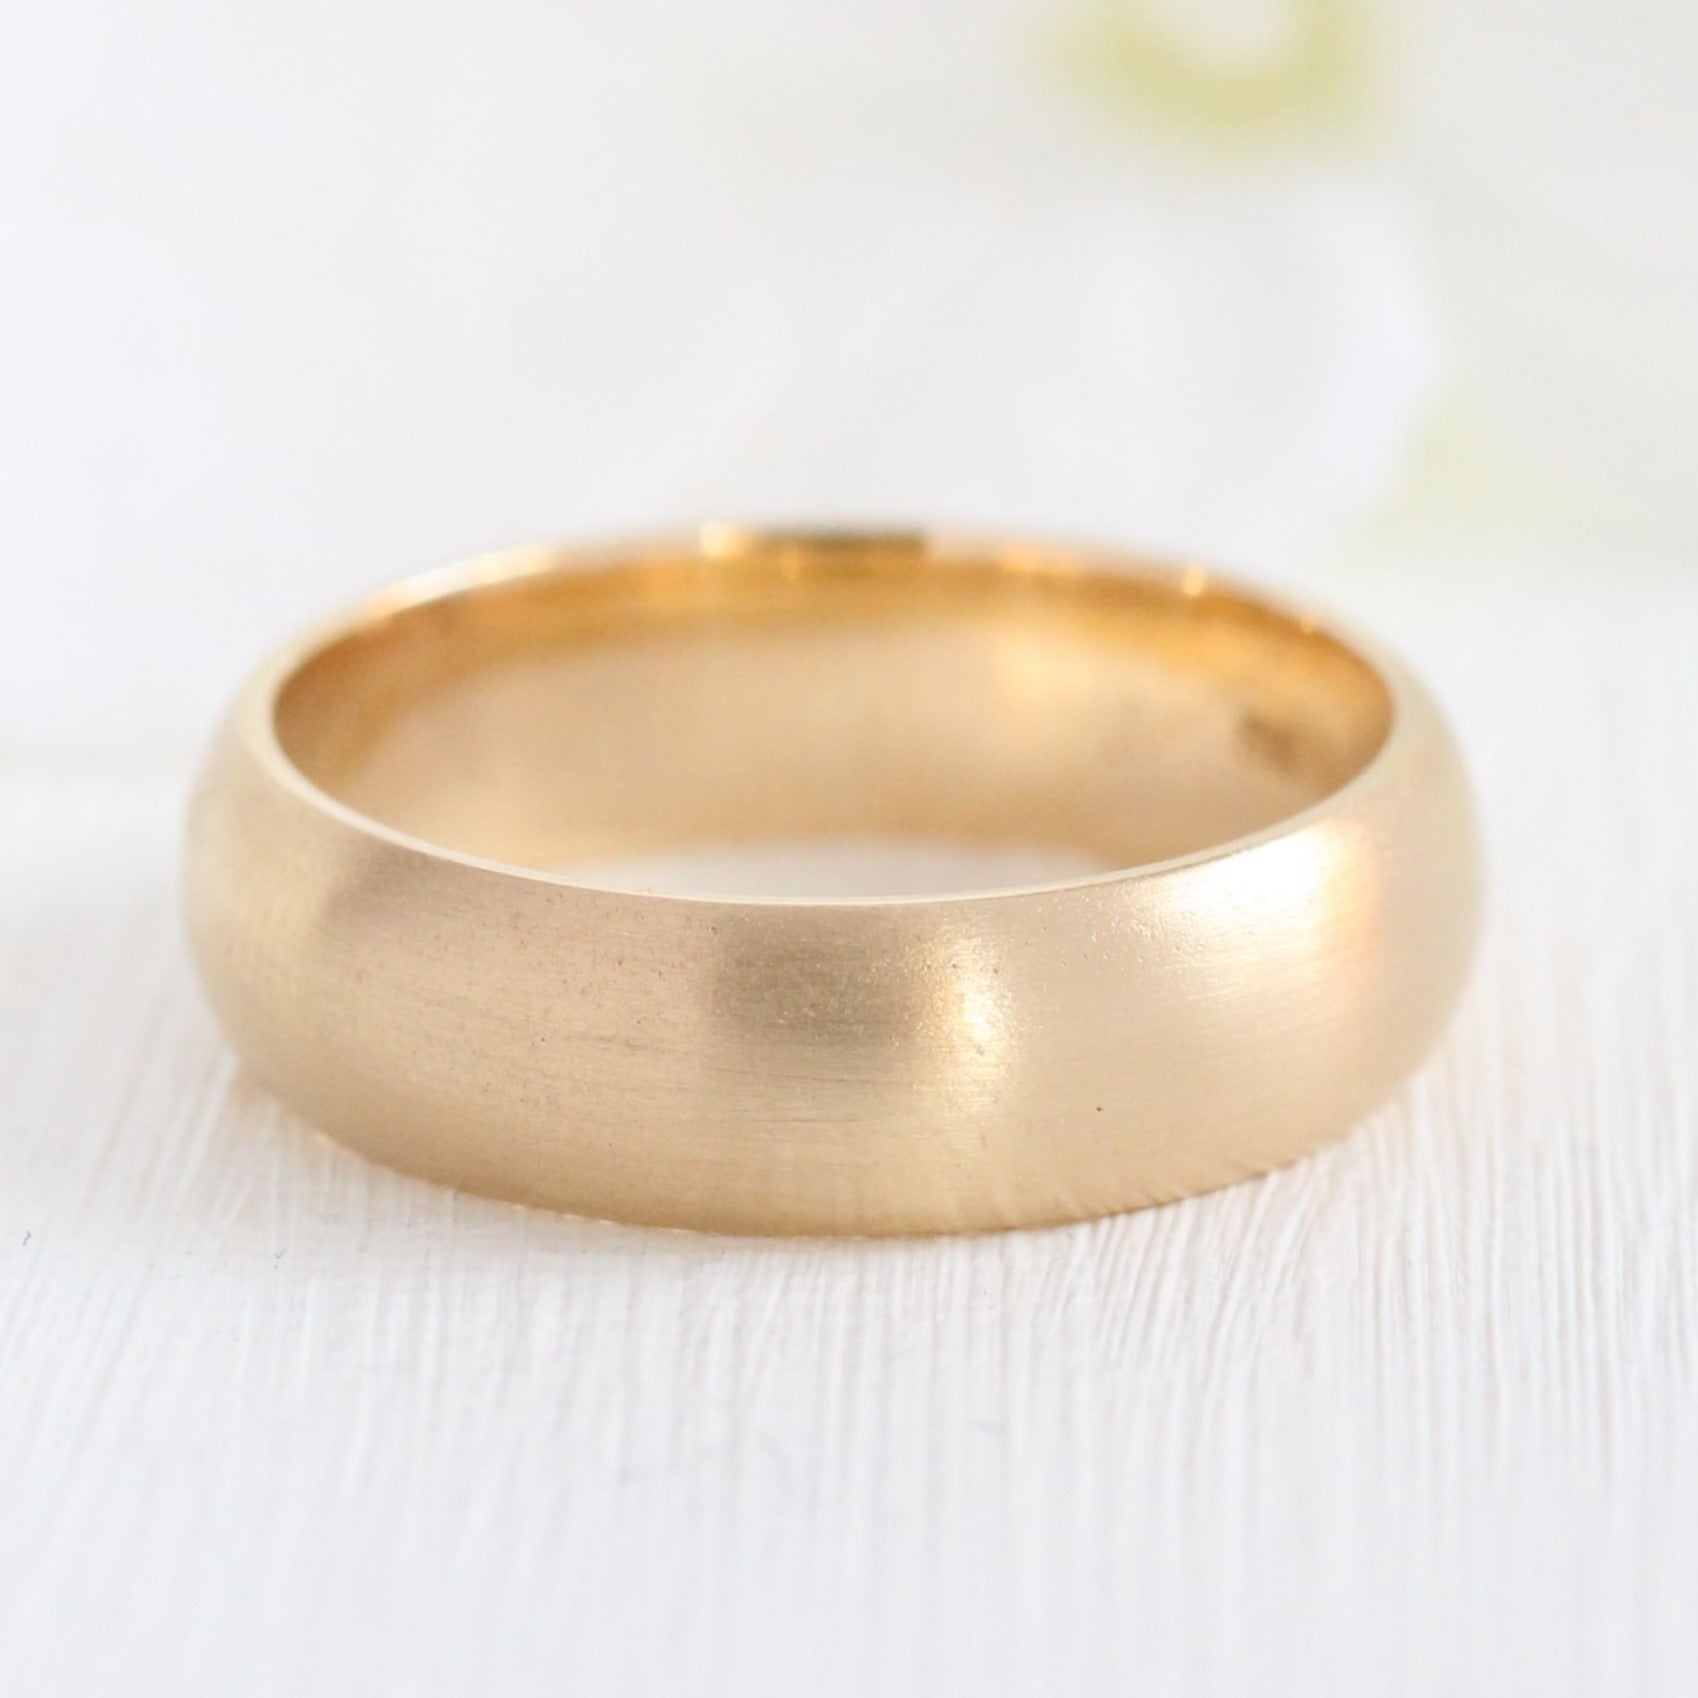 Matte 14K gold ring, Unisex Satin finish gold stacking ring, wedding b -  South Paw Studios Handcrafted Designer Jewelry